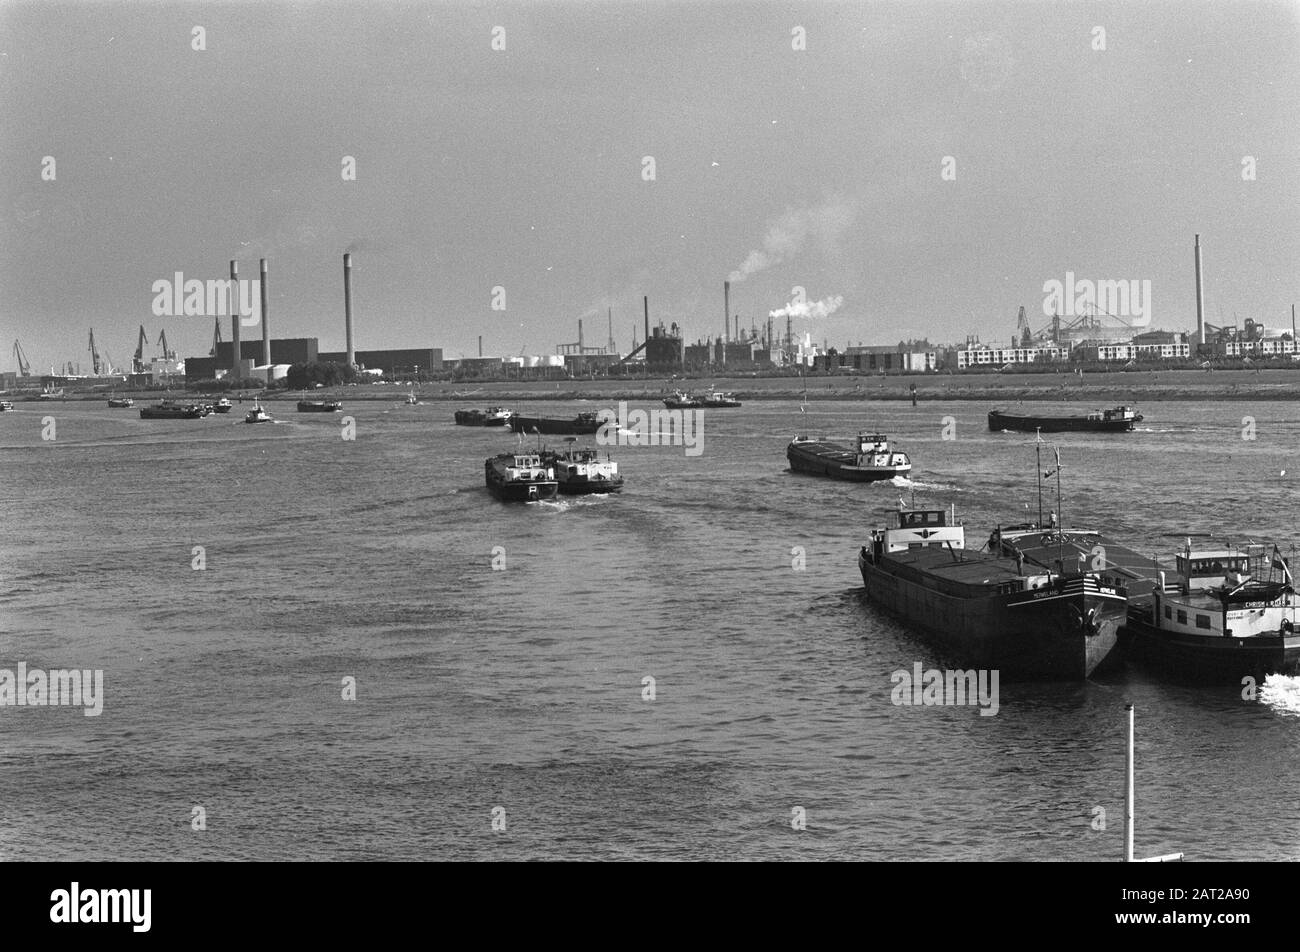 Elimination of the blockade of the barges due to the issue of proportional cargo distribution  Ships sailing on the Nieuwe Waterweg Date: August 26, 1975 Keywords: blockages, channels, protests , shipping, ships Stock Photo